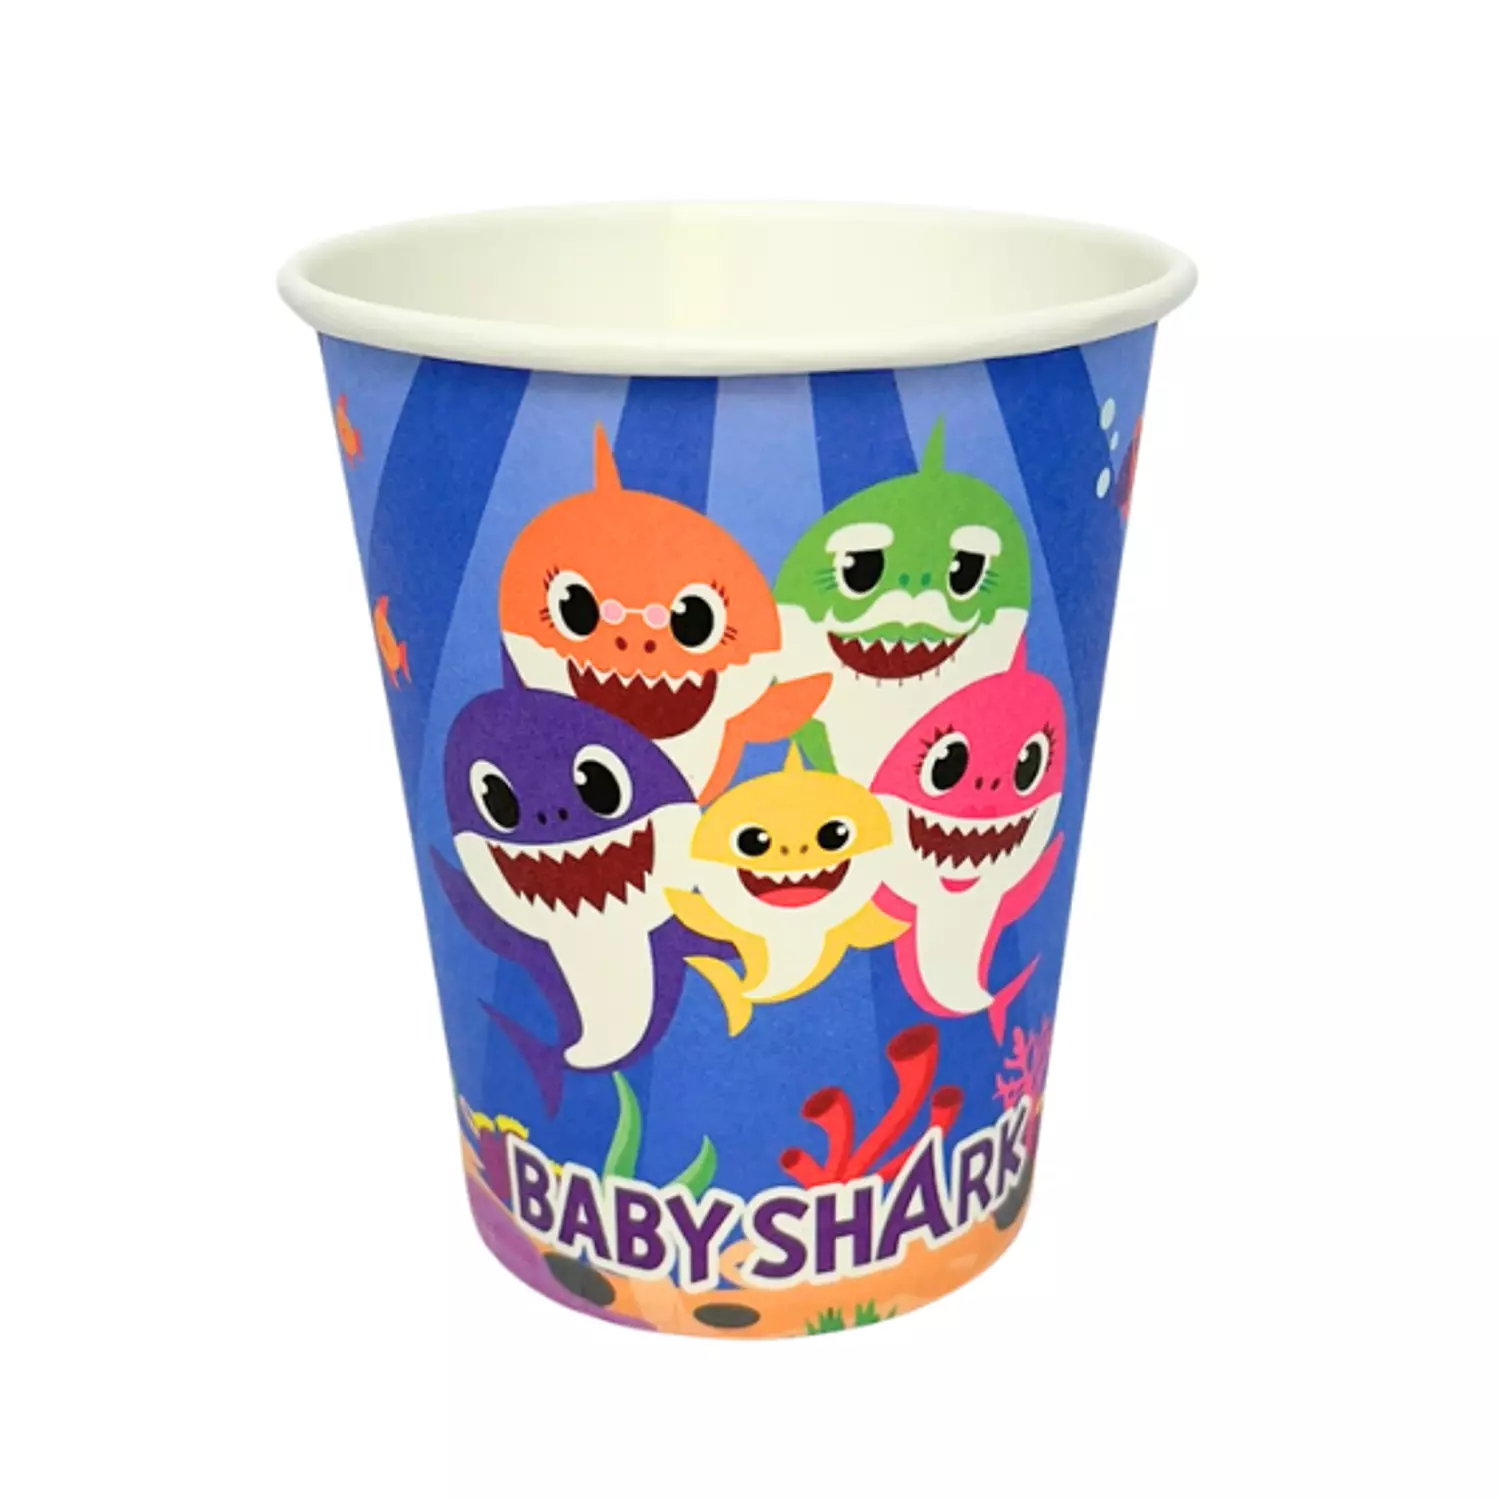 Baby Shark Paper Cups hover image